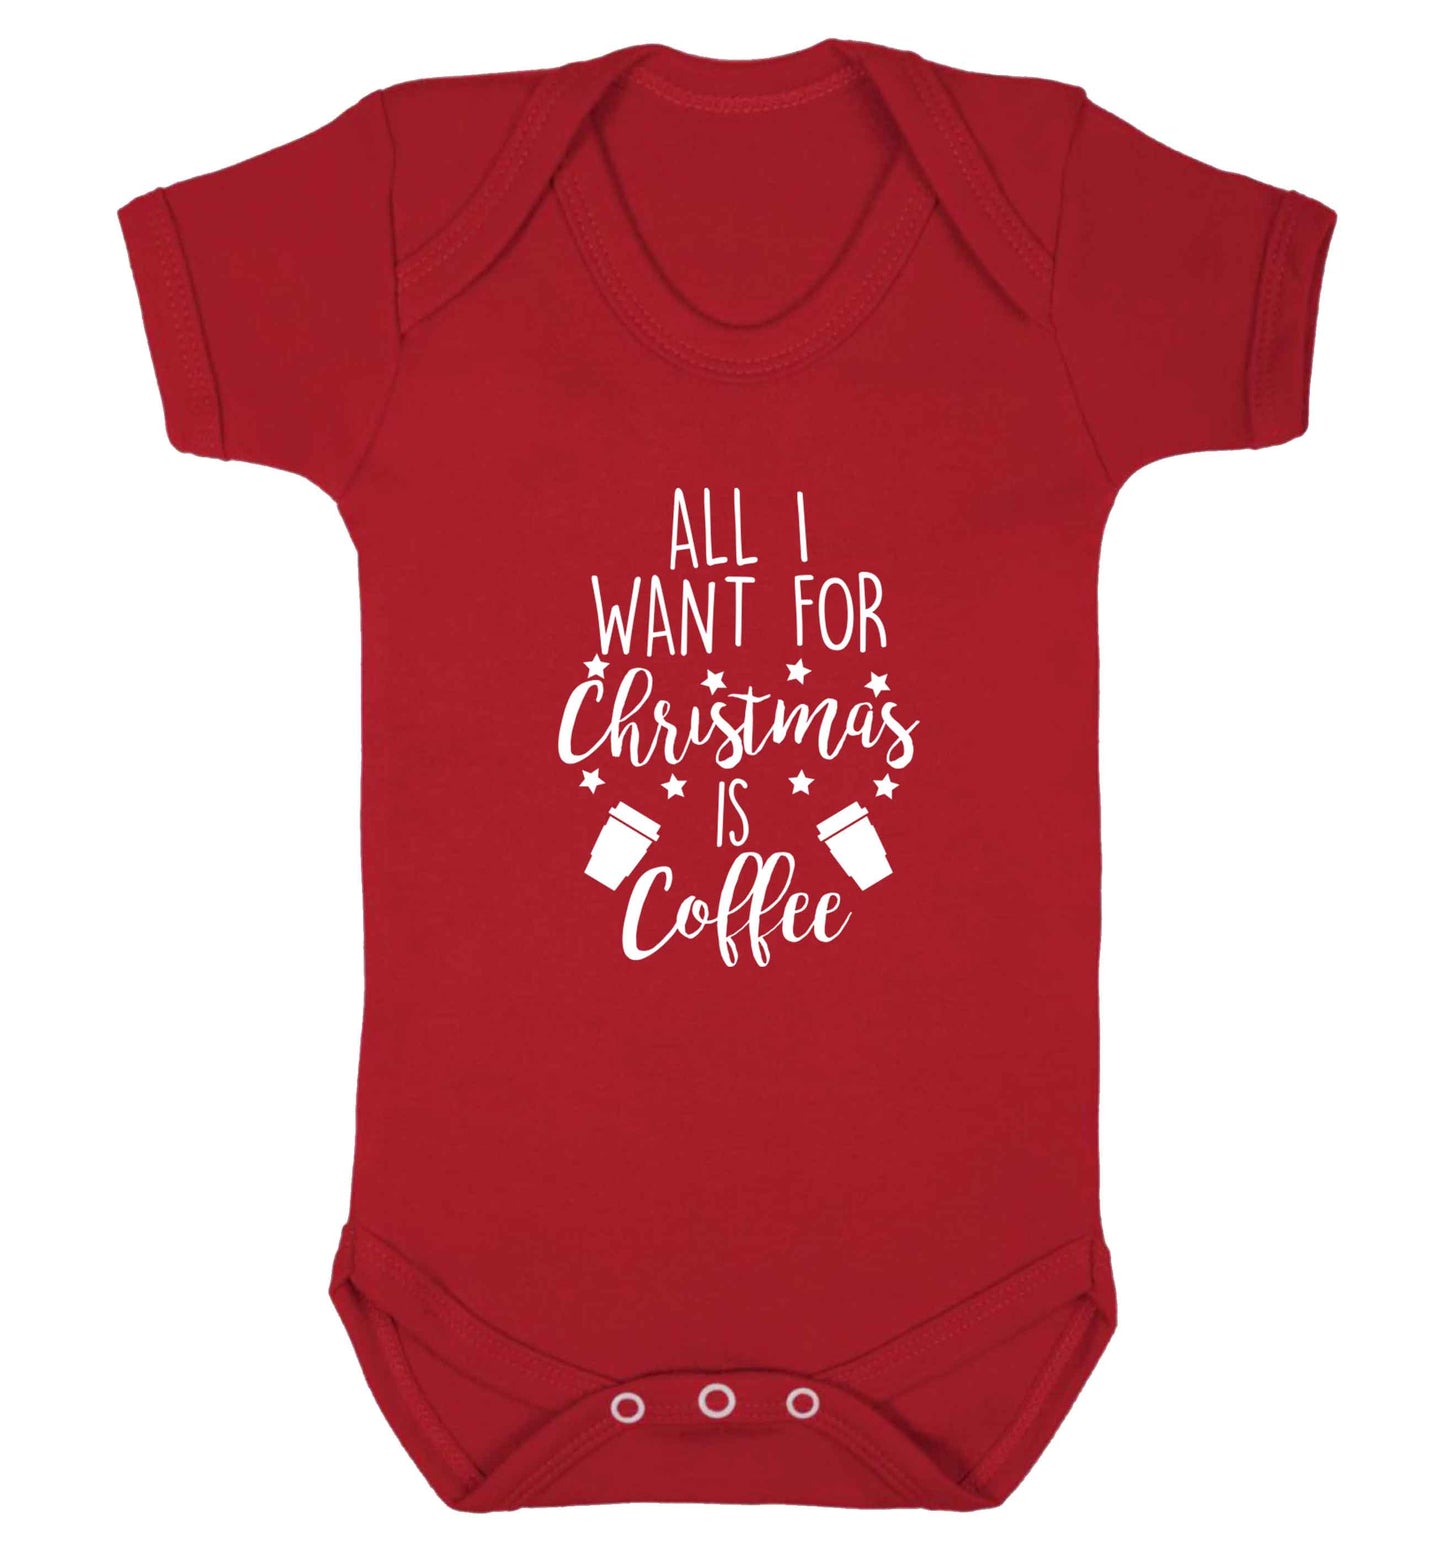 All I want for Christmas is coffee Baby Vest red 18-24 months